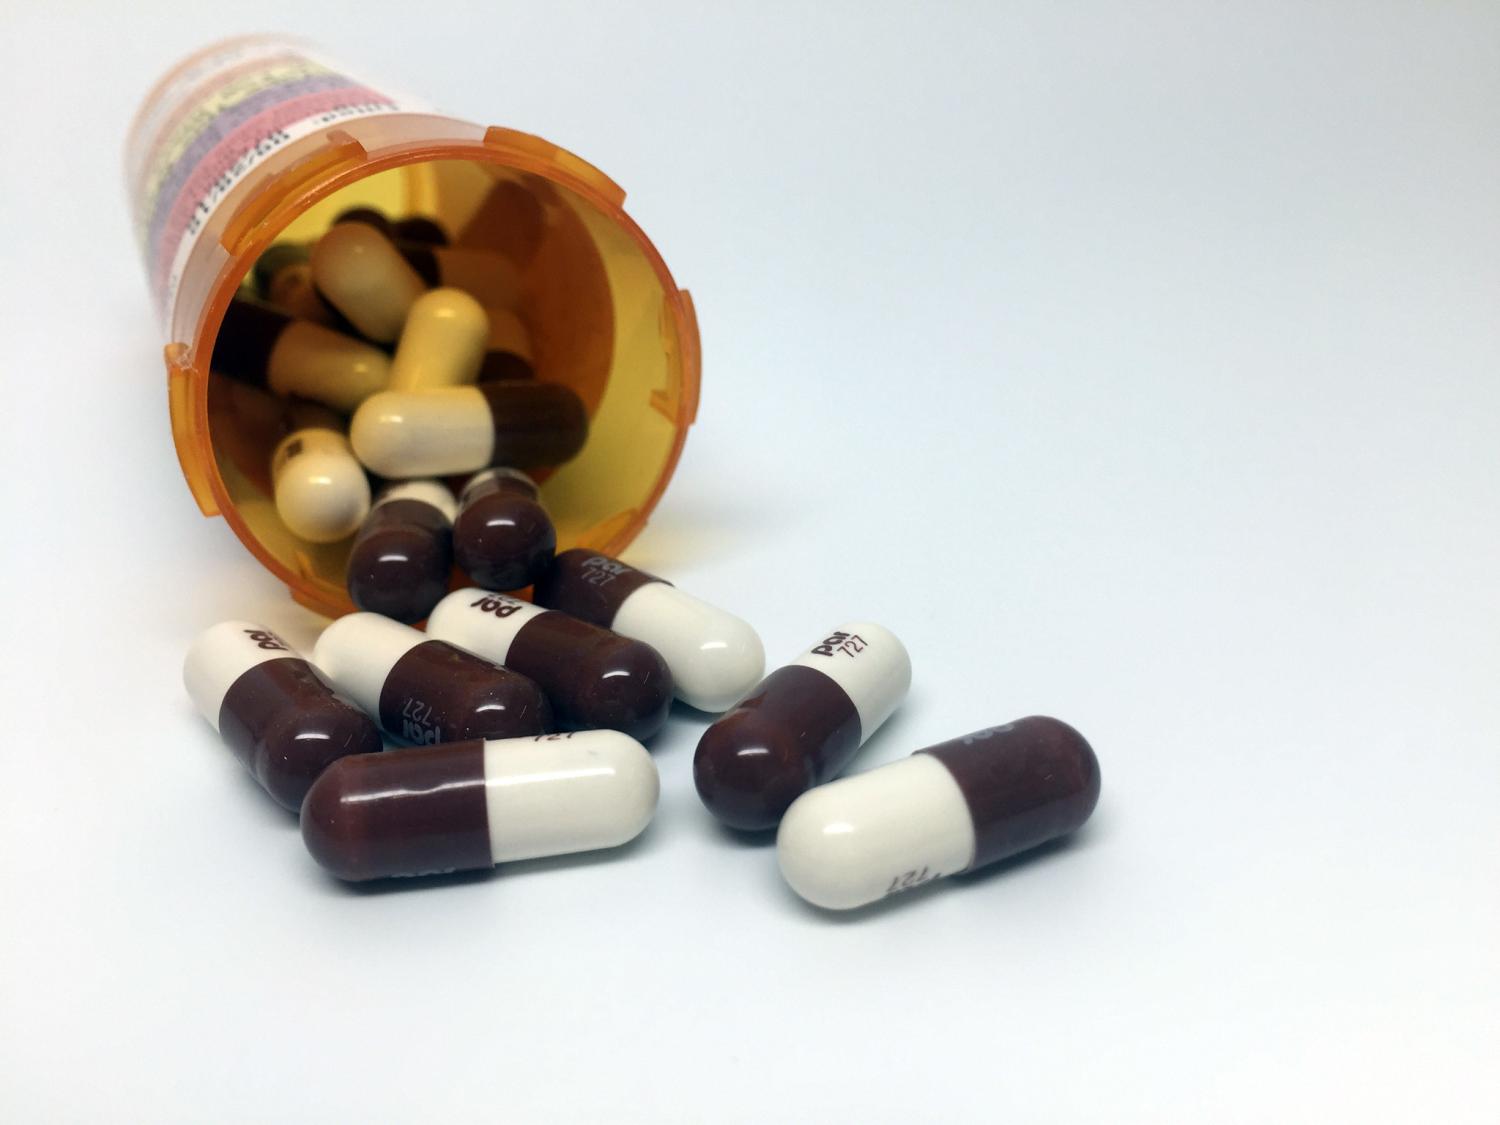 Doxycycline bottle and pills